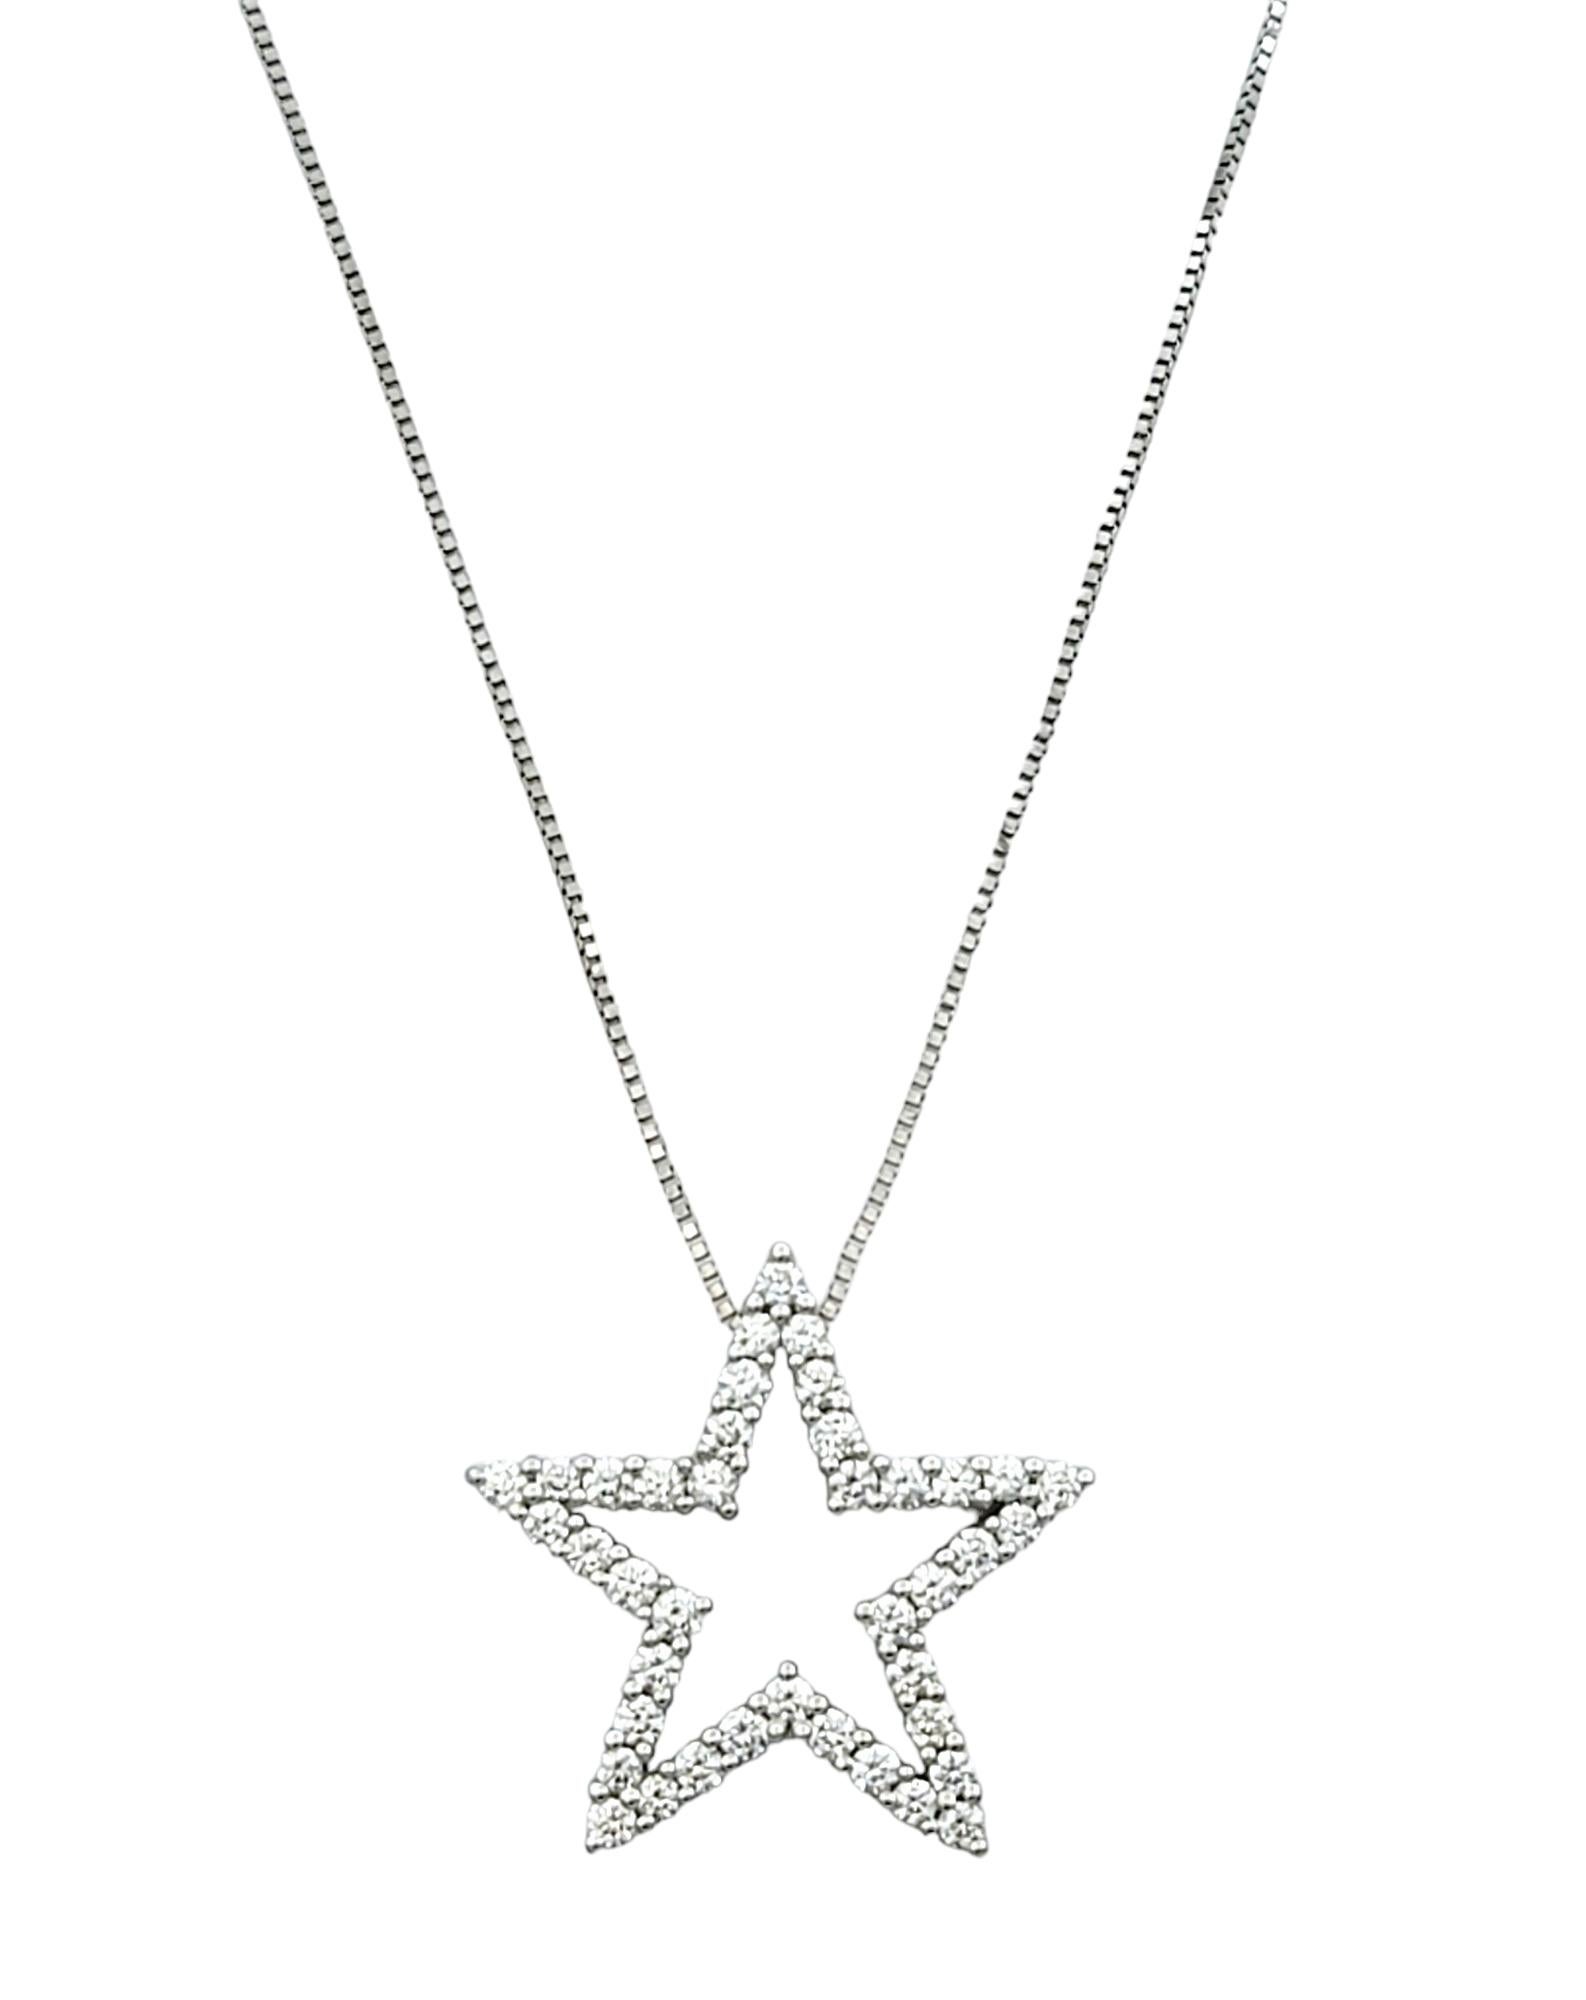 This stunning necklace features an open star design crafted from luminous 14 karat white gold, creating a celestial-inspired motif that exudes elegance and charm. The open outline of the star is adorned with sparkling diamonds, radiating brilliance